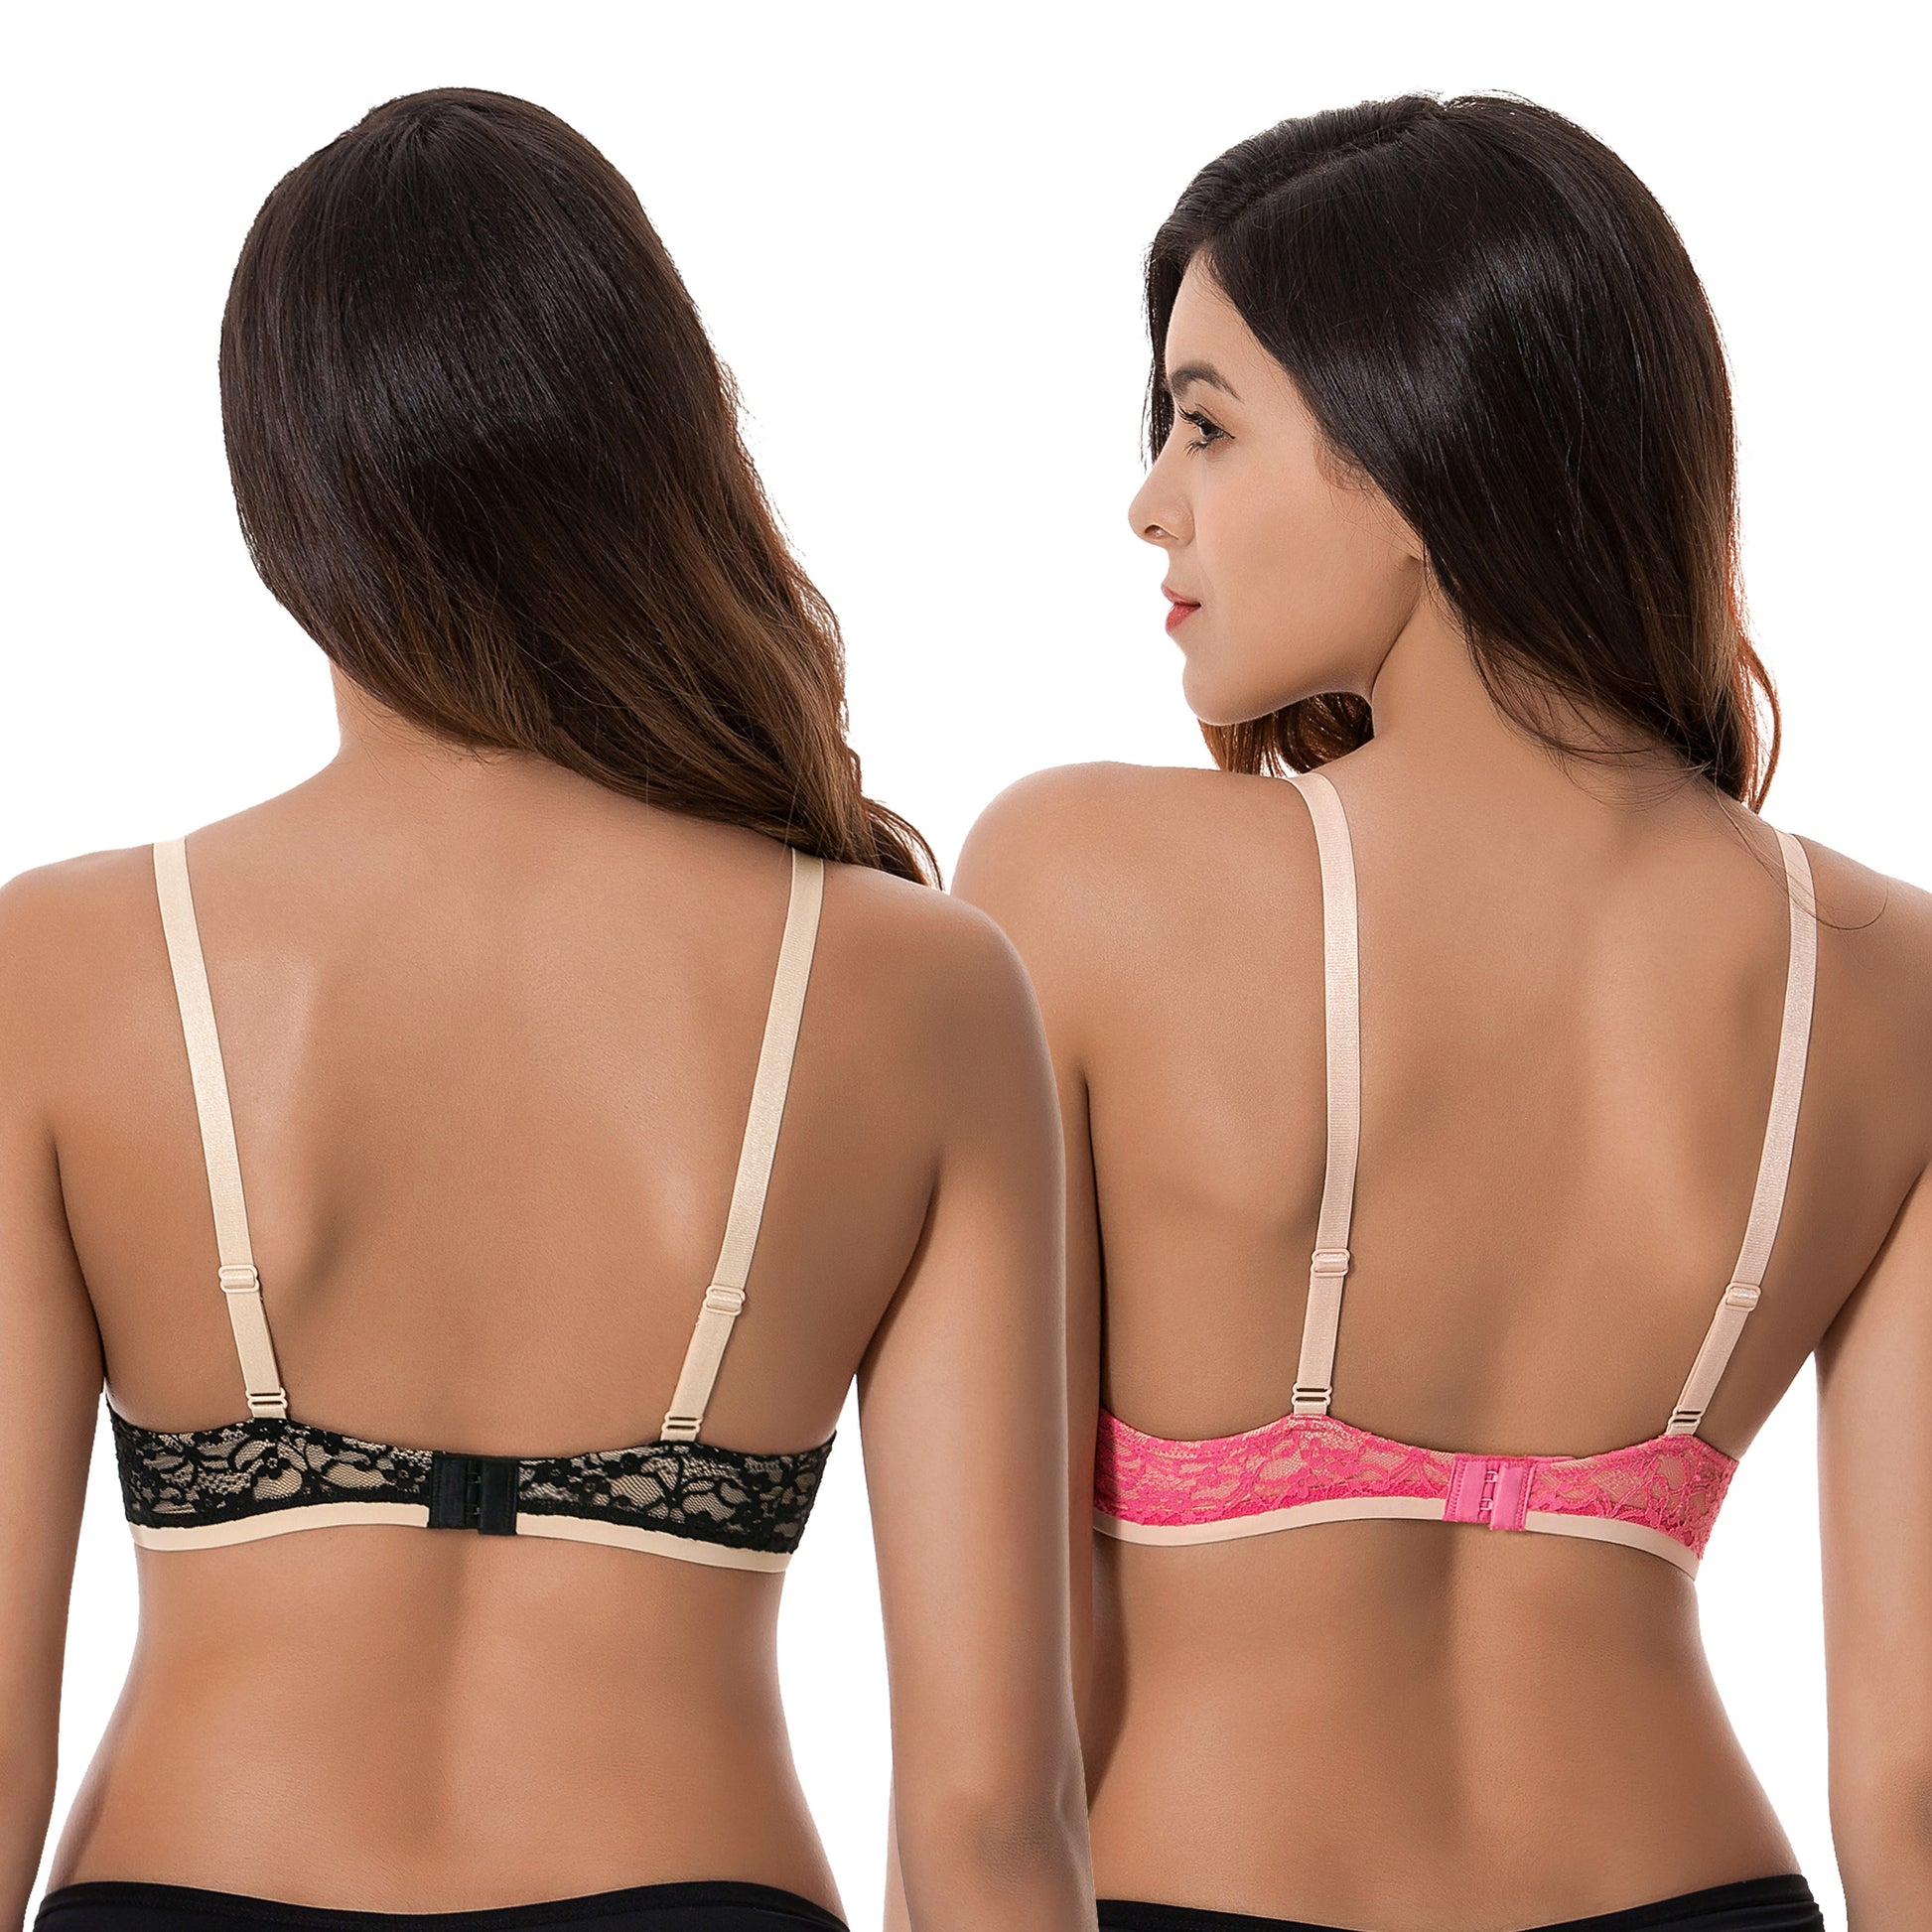 Curve Muse Women's Plus Size Push Up Add 1 Cup Underwire Perfect Shape Lace  Bras-2Pk-Black,Pink-42DD